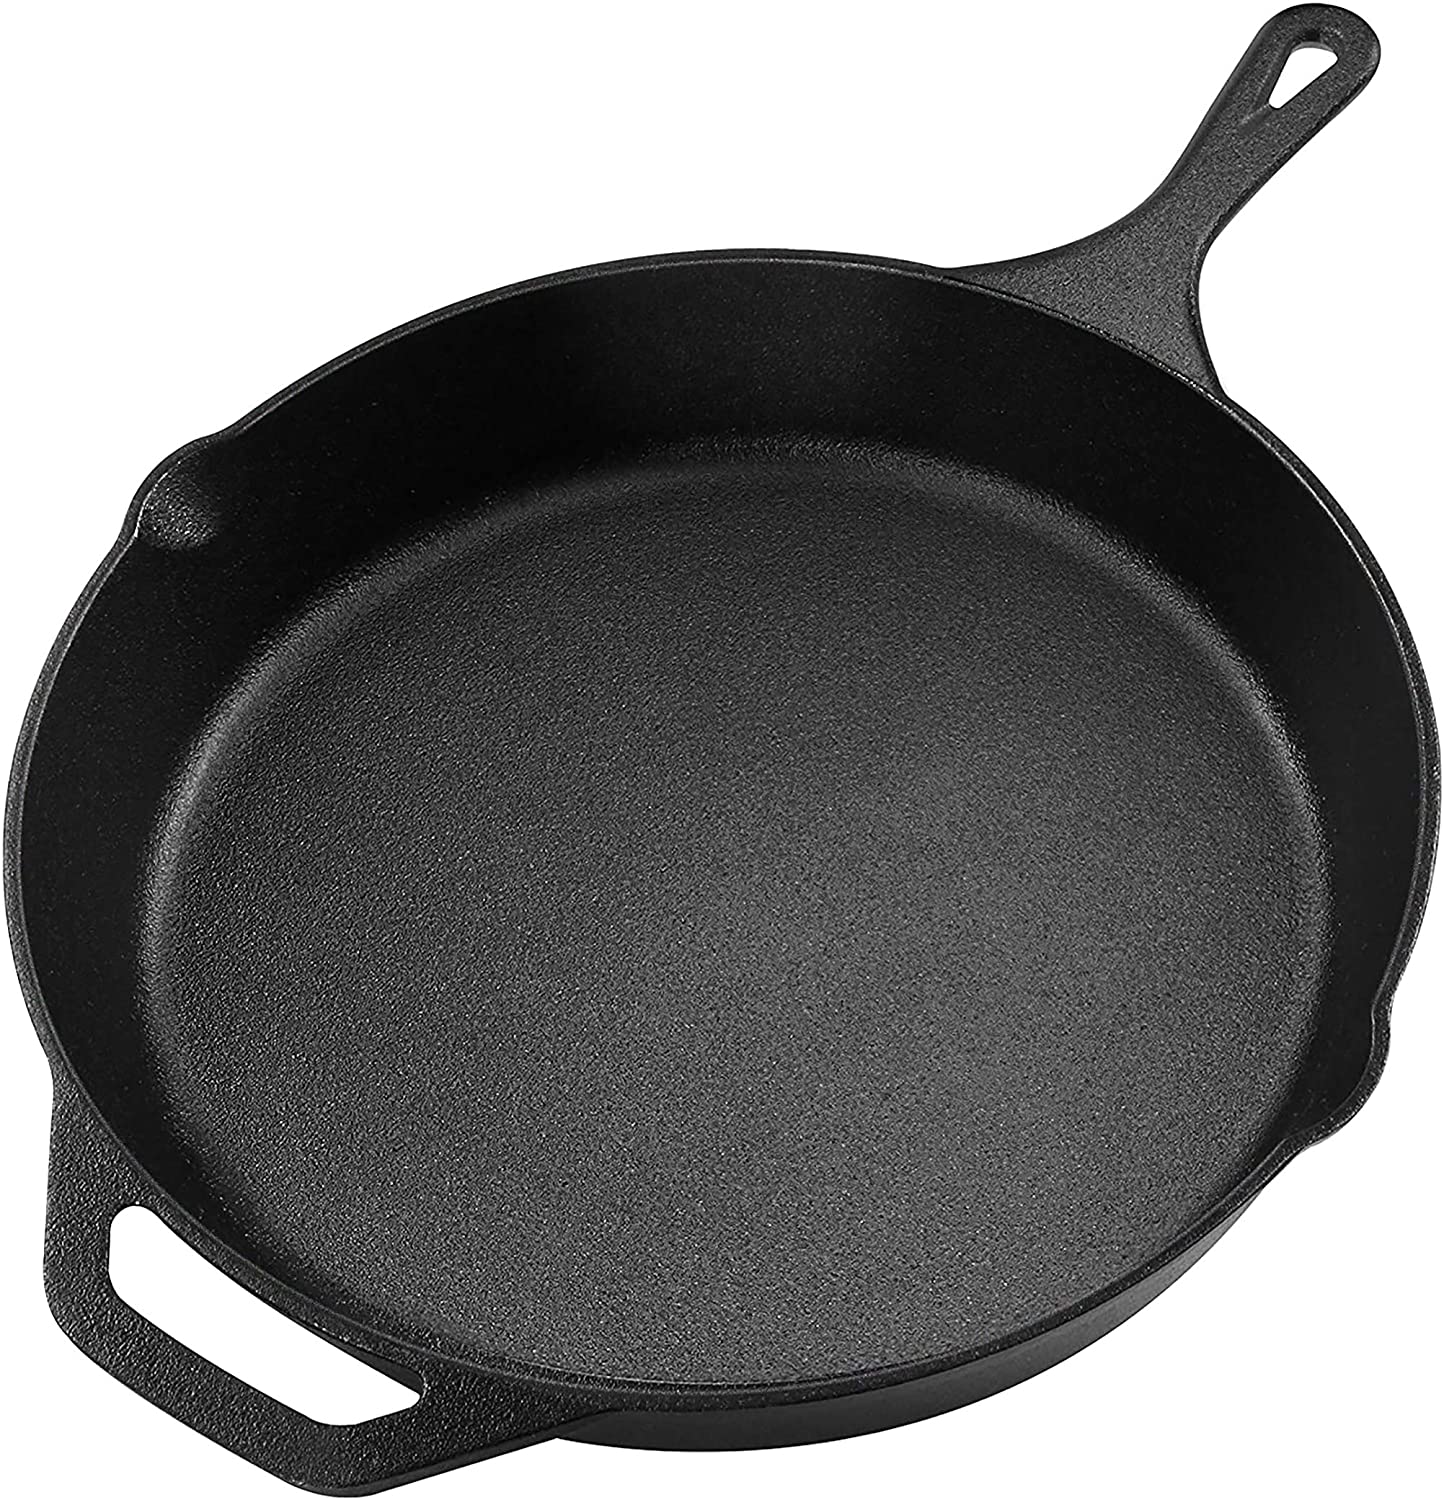 keto-gifts-cast-iron-skillet